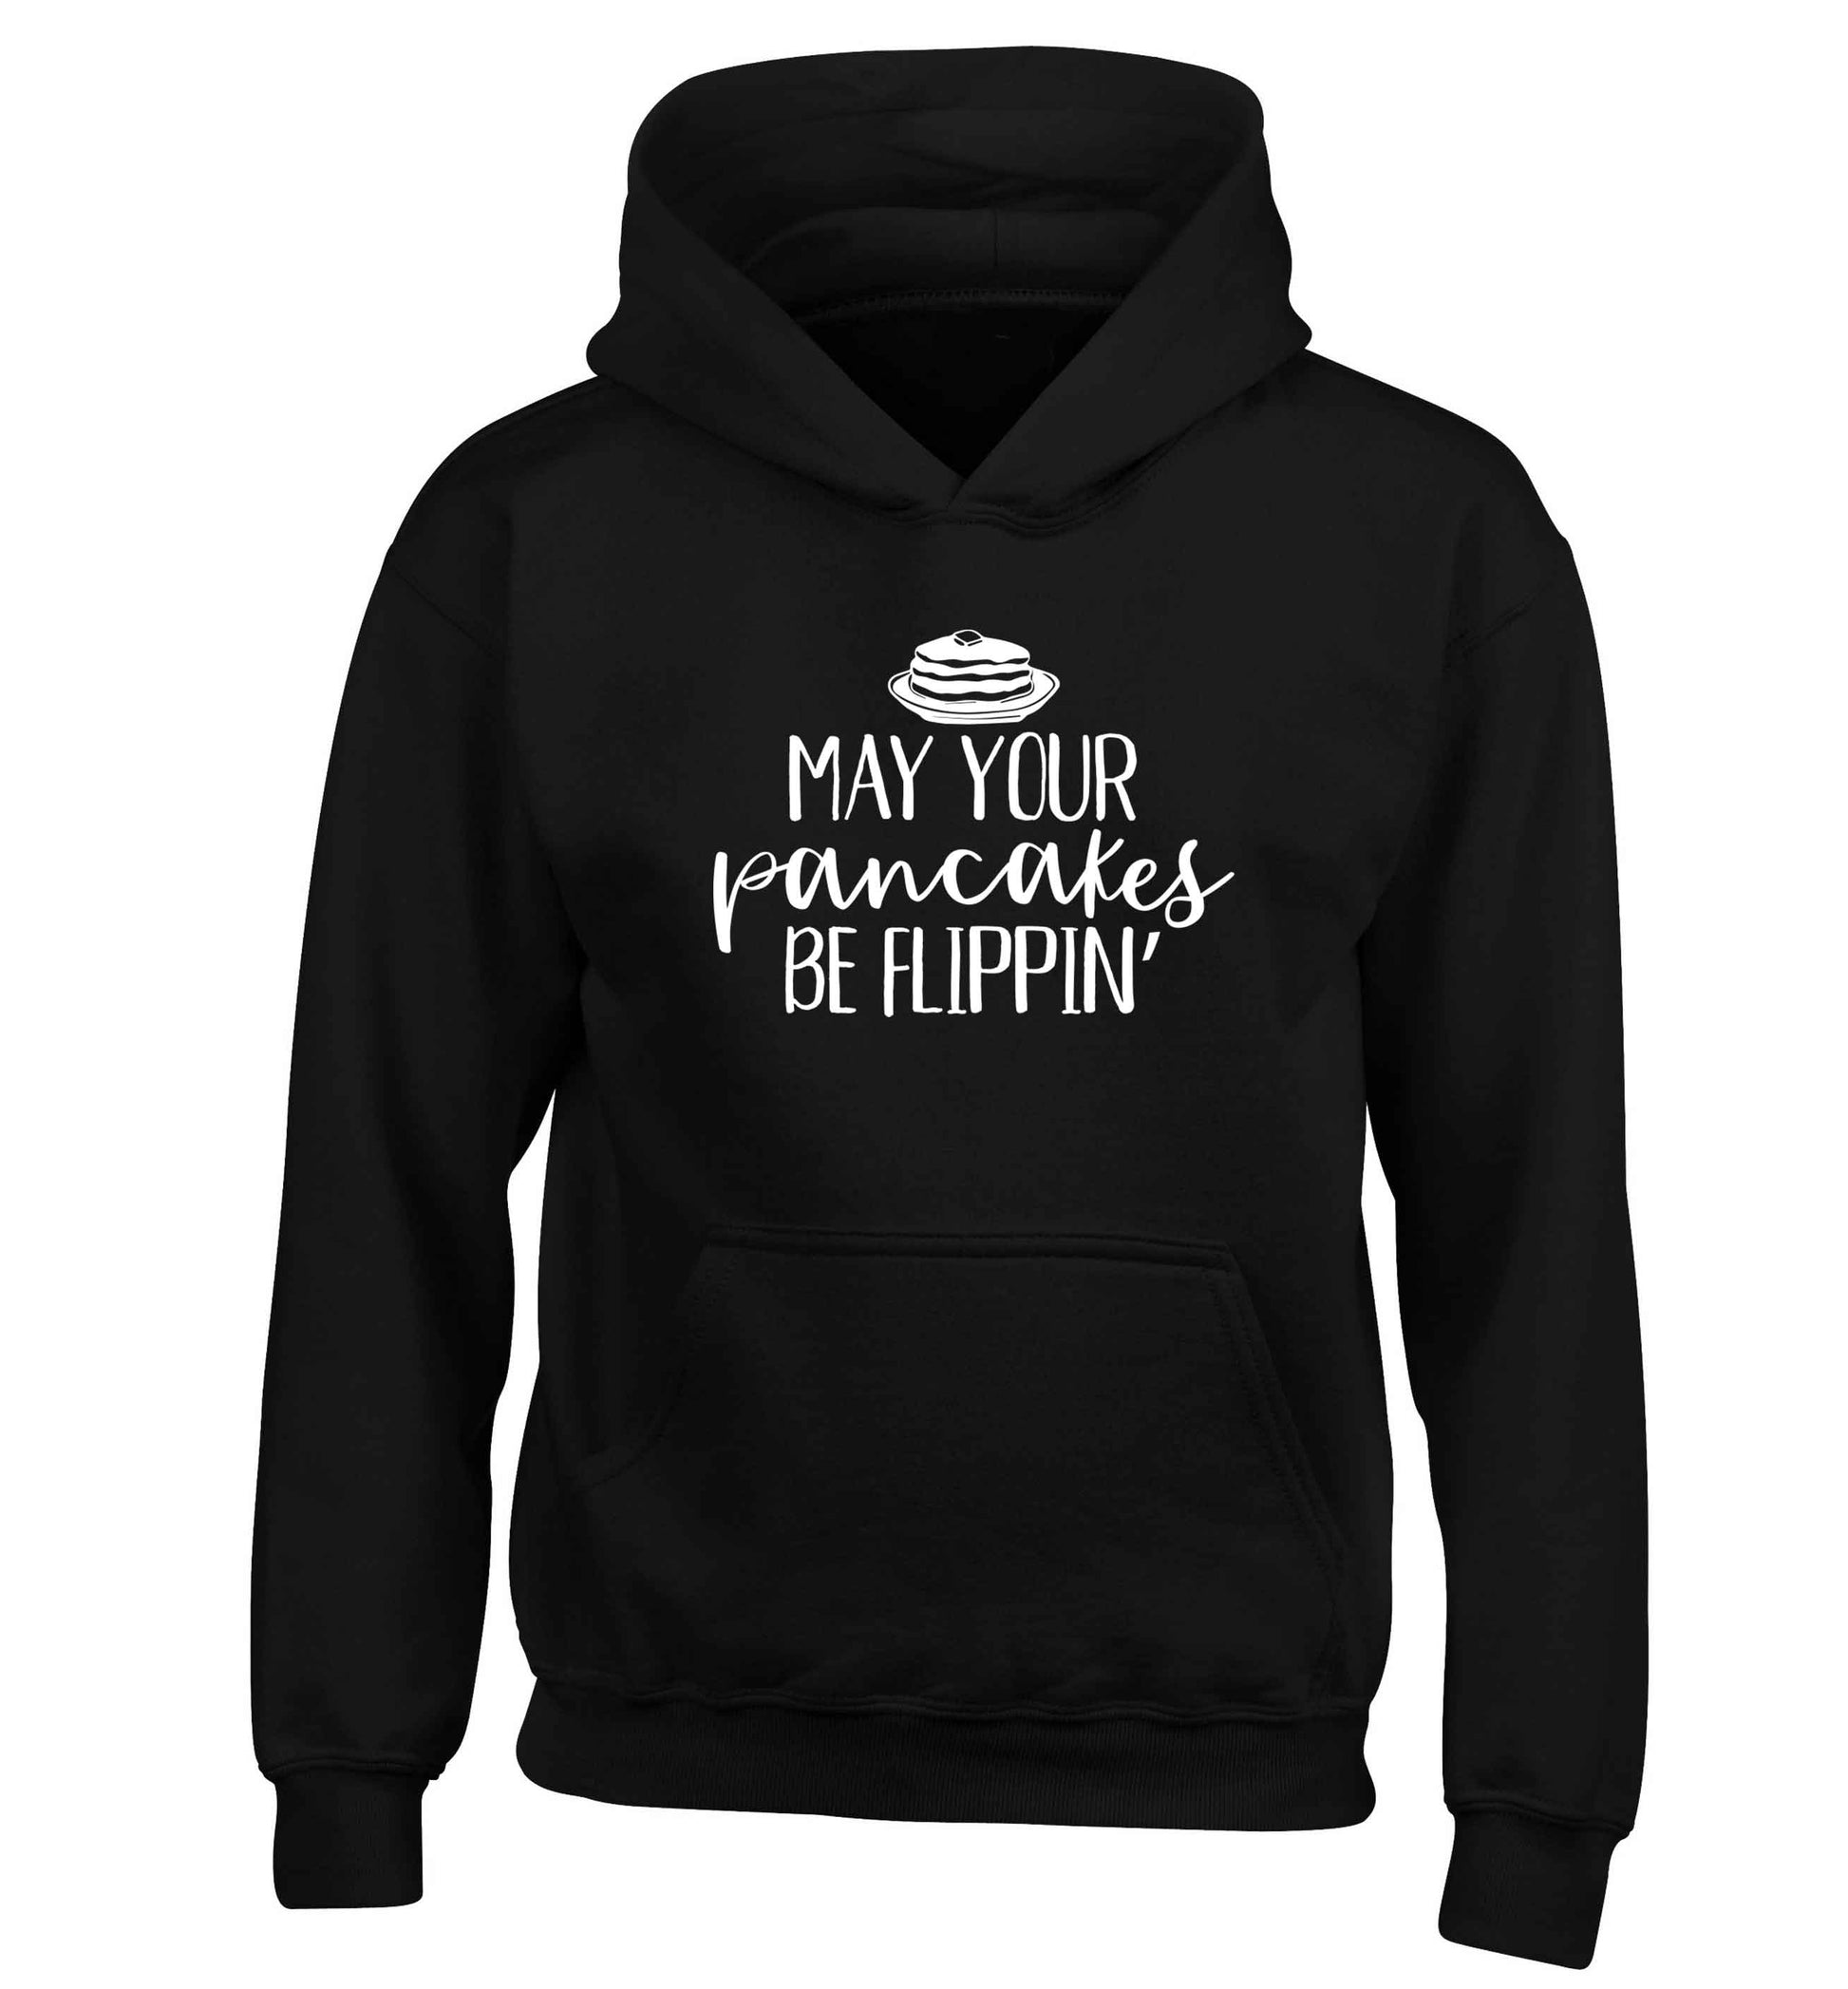 May your pancakes be flippin' children's black hoodie 12-13 Years